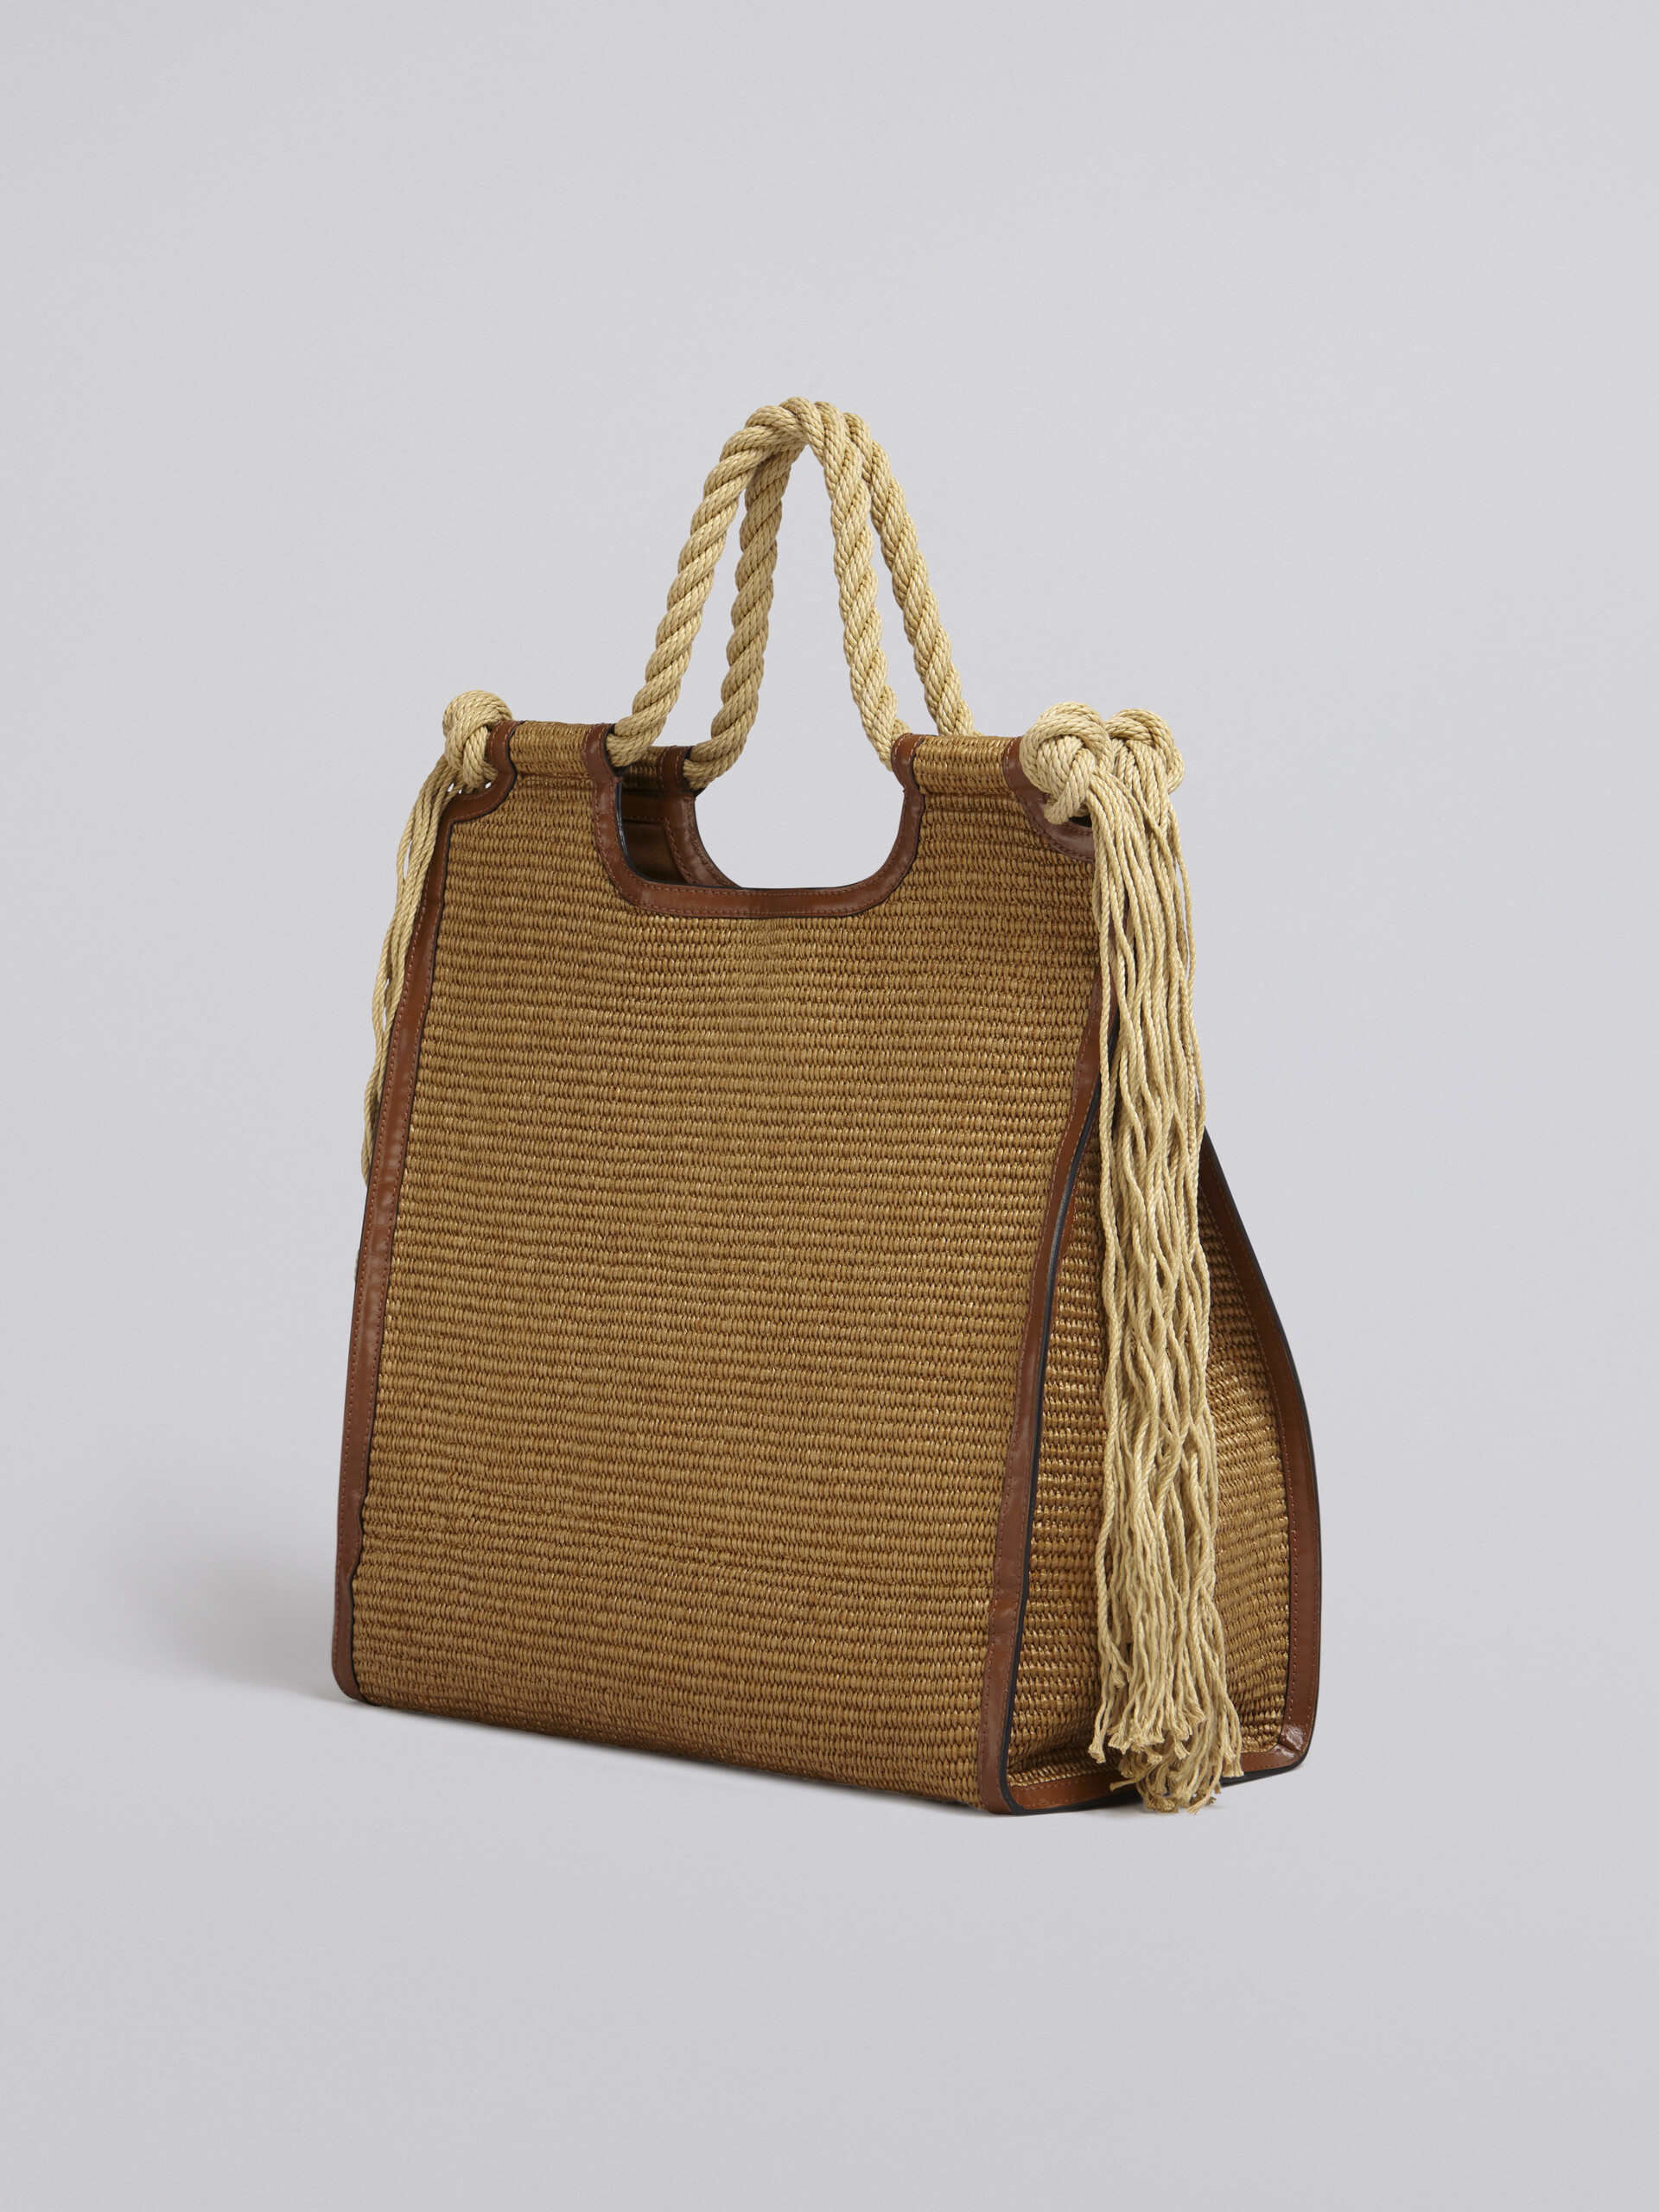 MARCEL summer bag in raffia-effect fabric, with brown leather and rope handles - Handbags - Image 3